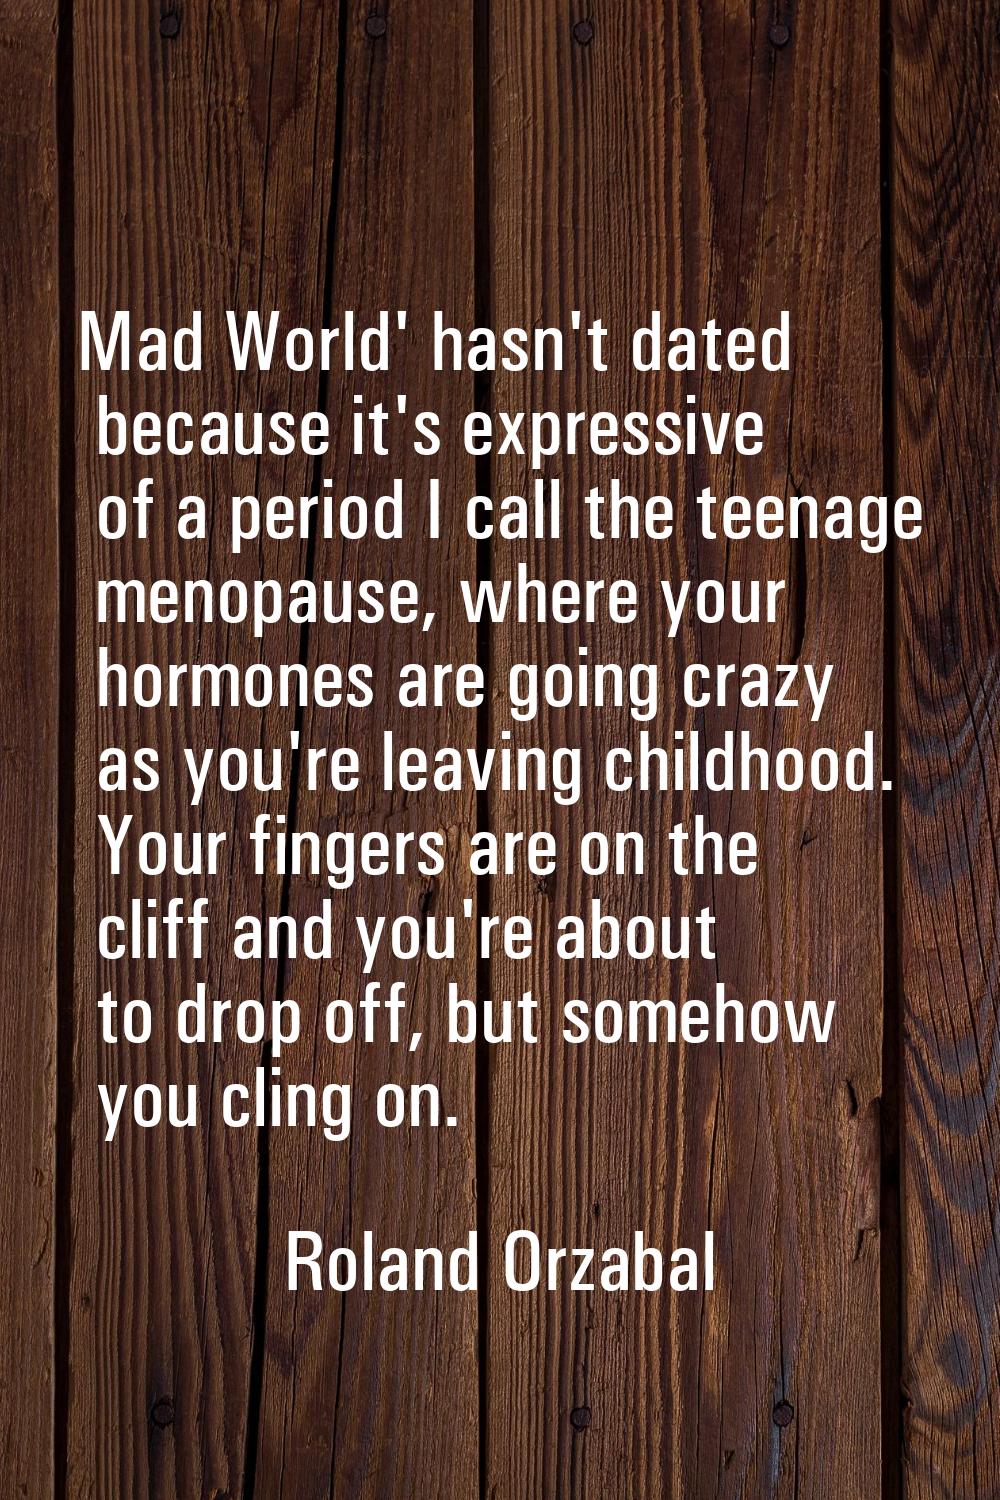 Mad World' hasn't dated because it's expressive of a period I call the teenage menopause, where you